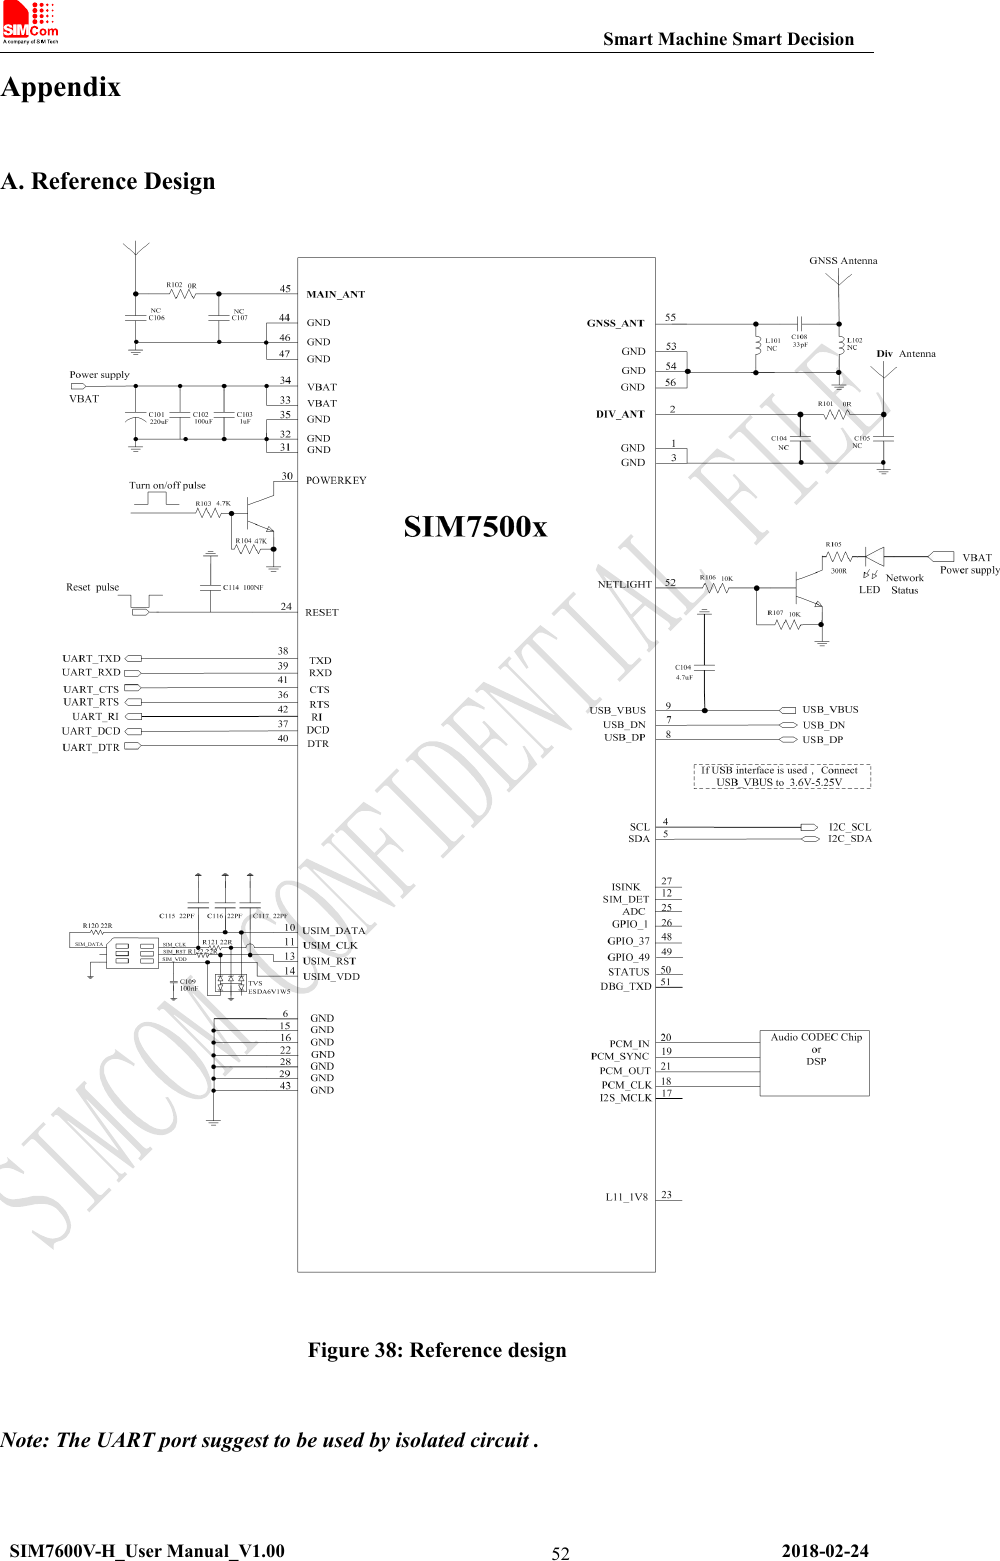 Smart Machine Smart DecisionSIM7600V-H_User Manual_V1.00 2018-02-2452AppendixA. Reference DesignFigure 38: Reference designNote: The UART port suggest to be used by isolated circuit .